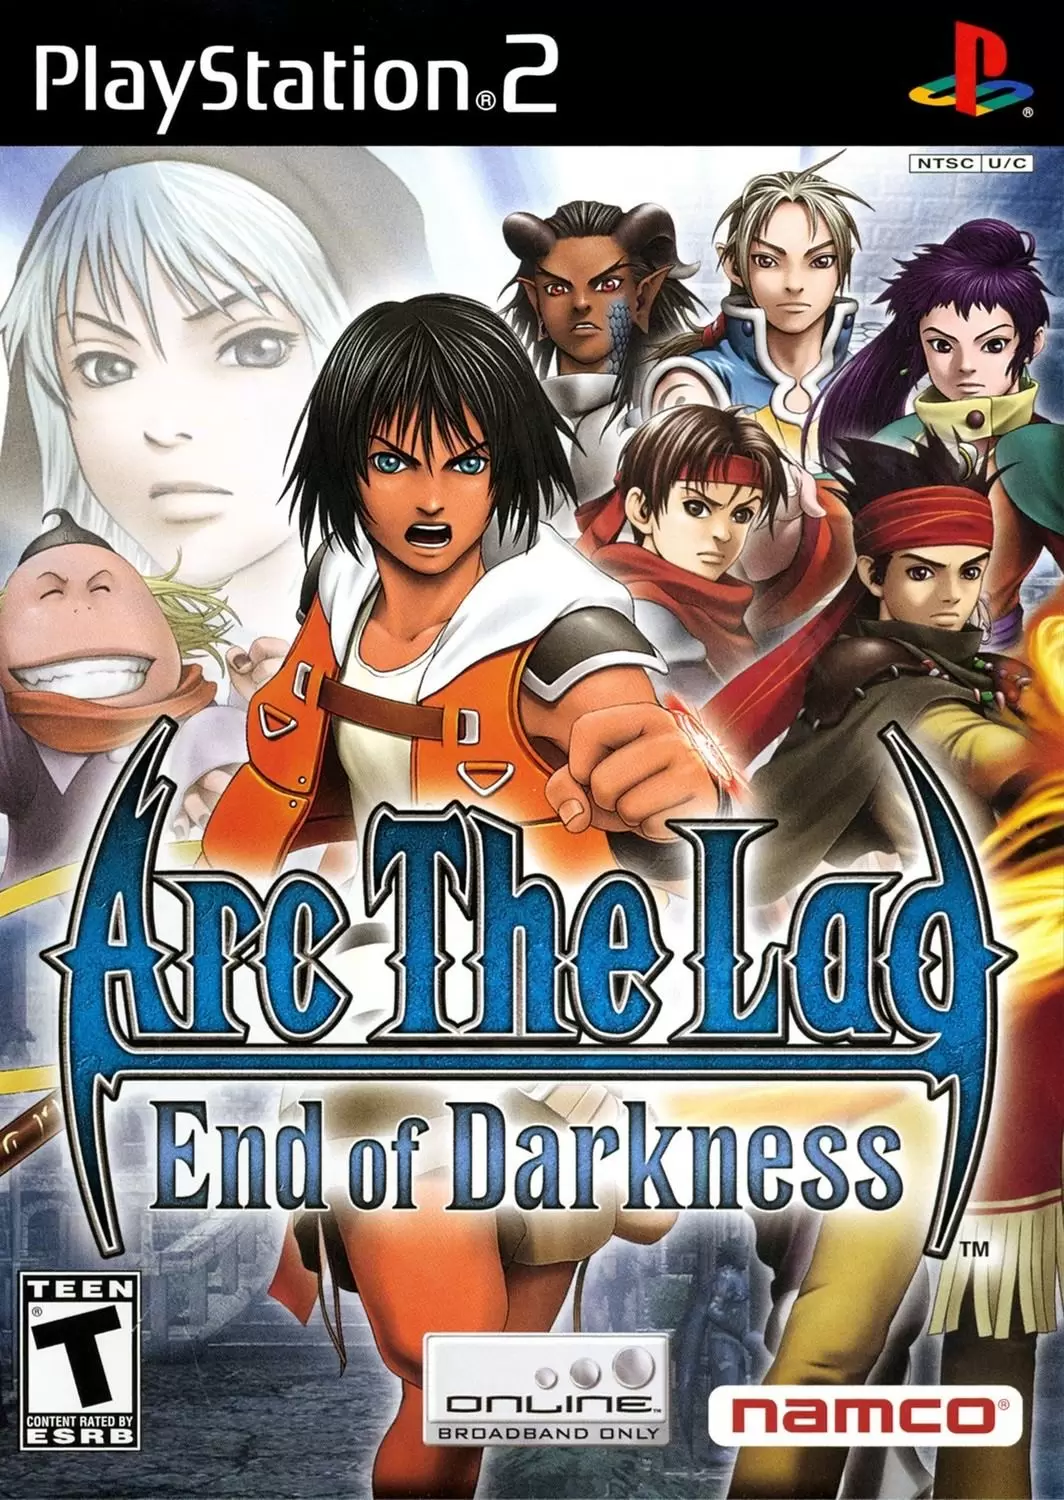 PS2 Games - Arc the Lad: End of Darkness